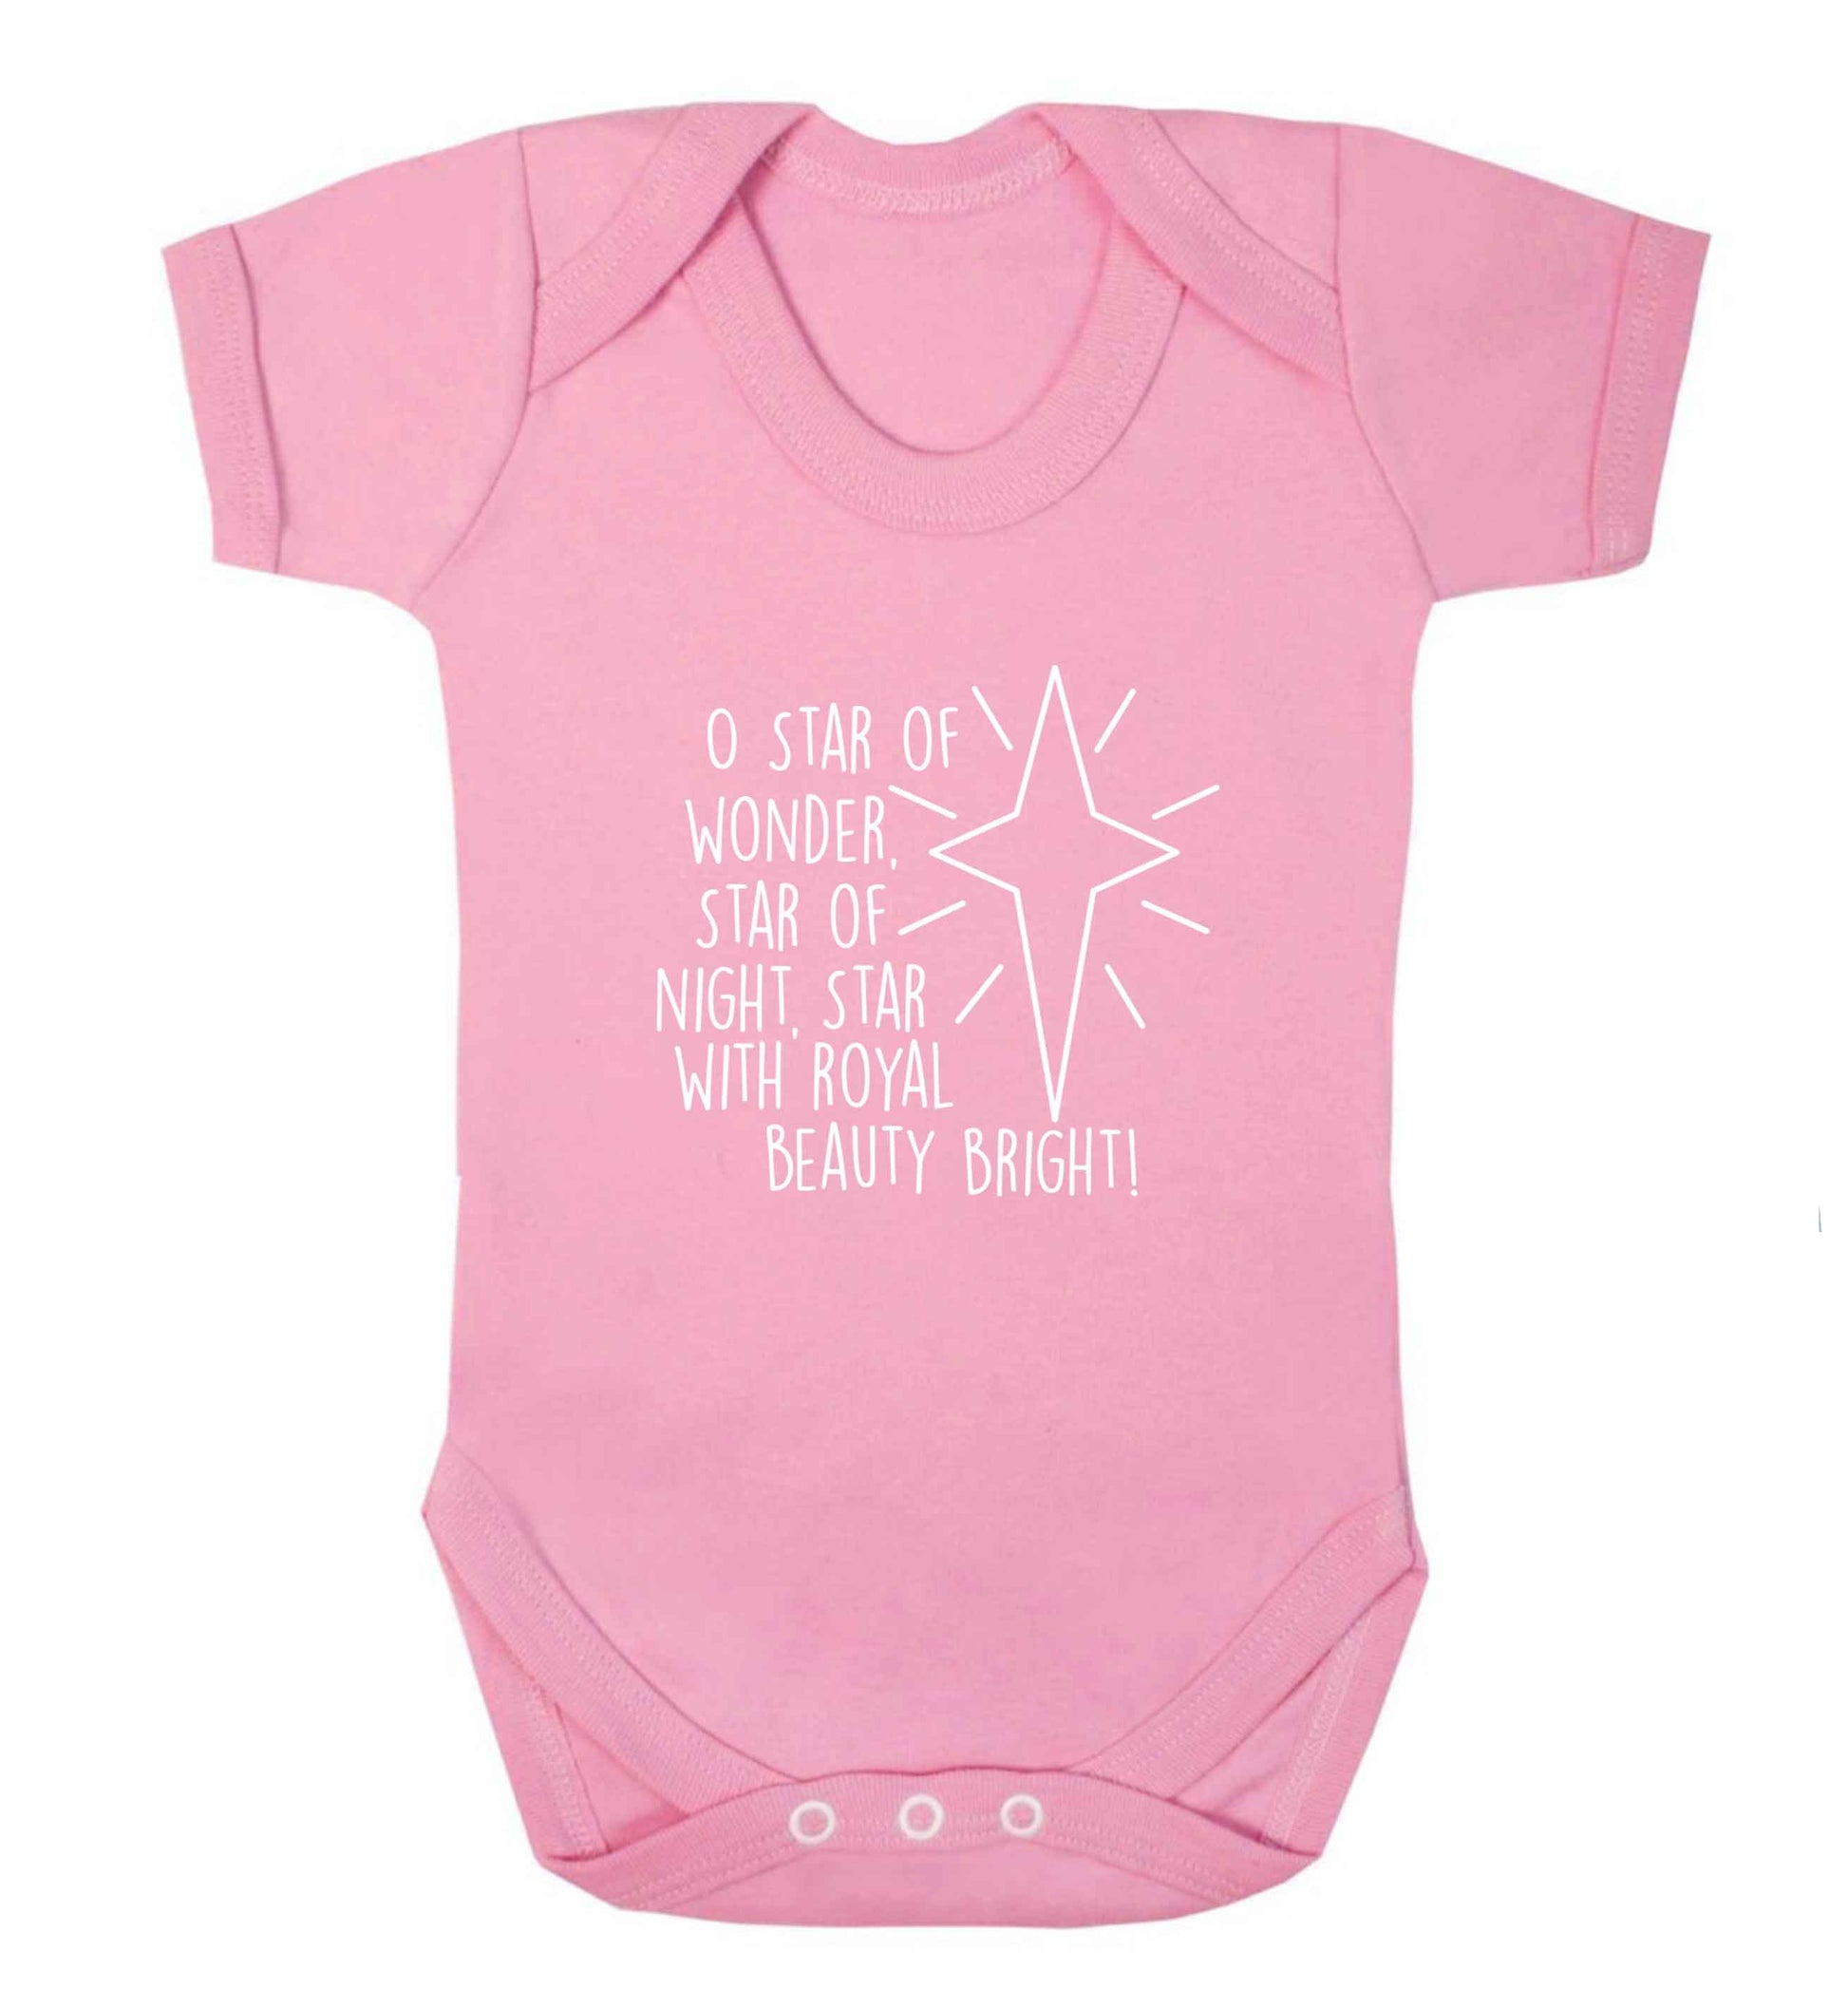 Oh star of wonder star of night, star with royal beauty bright baby vest pale pink 18-24 months